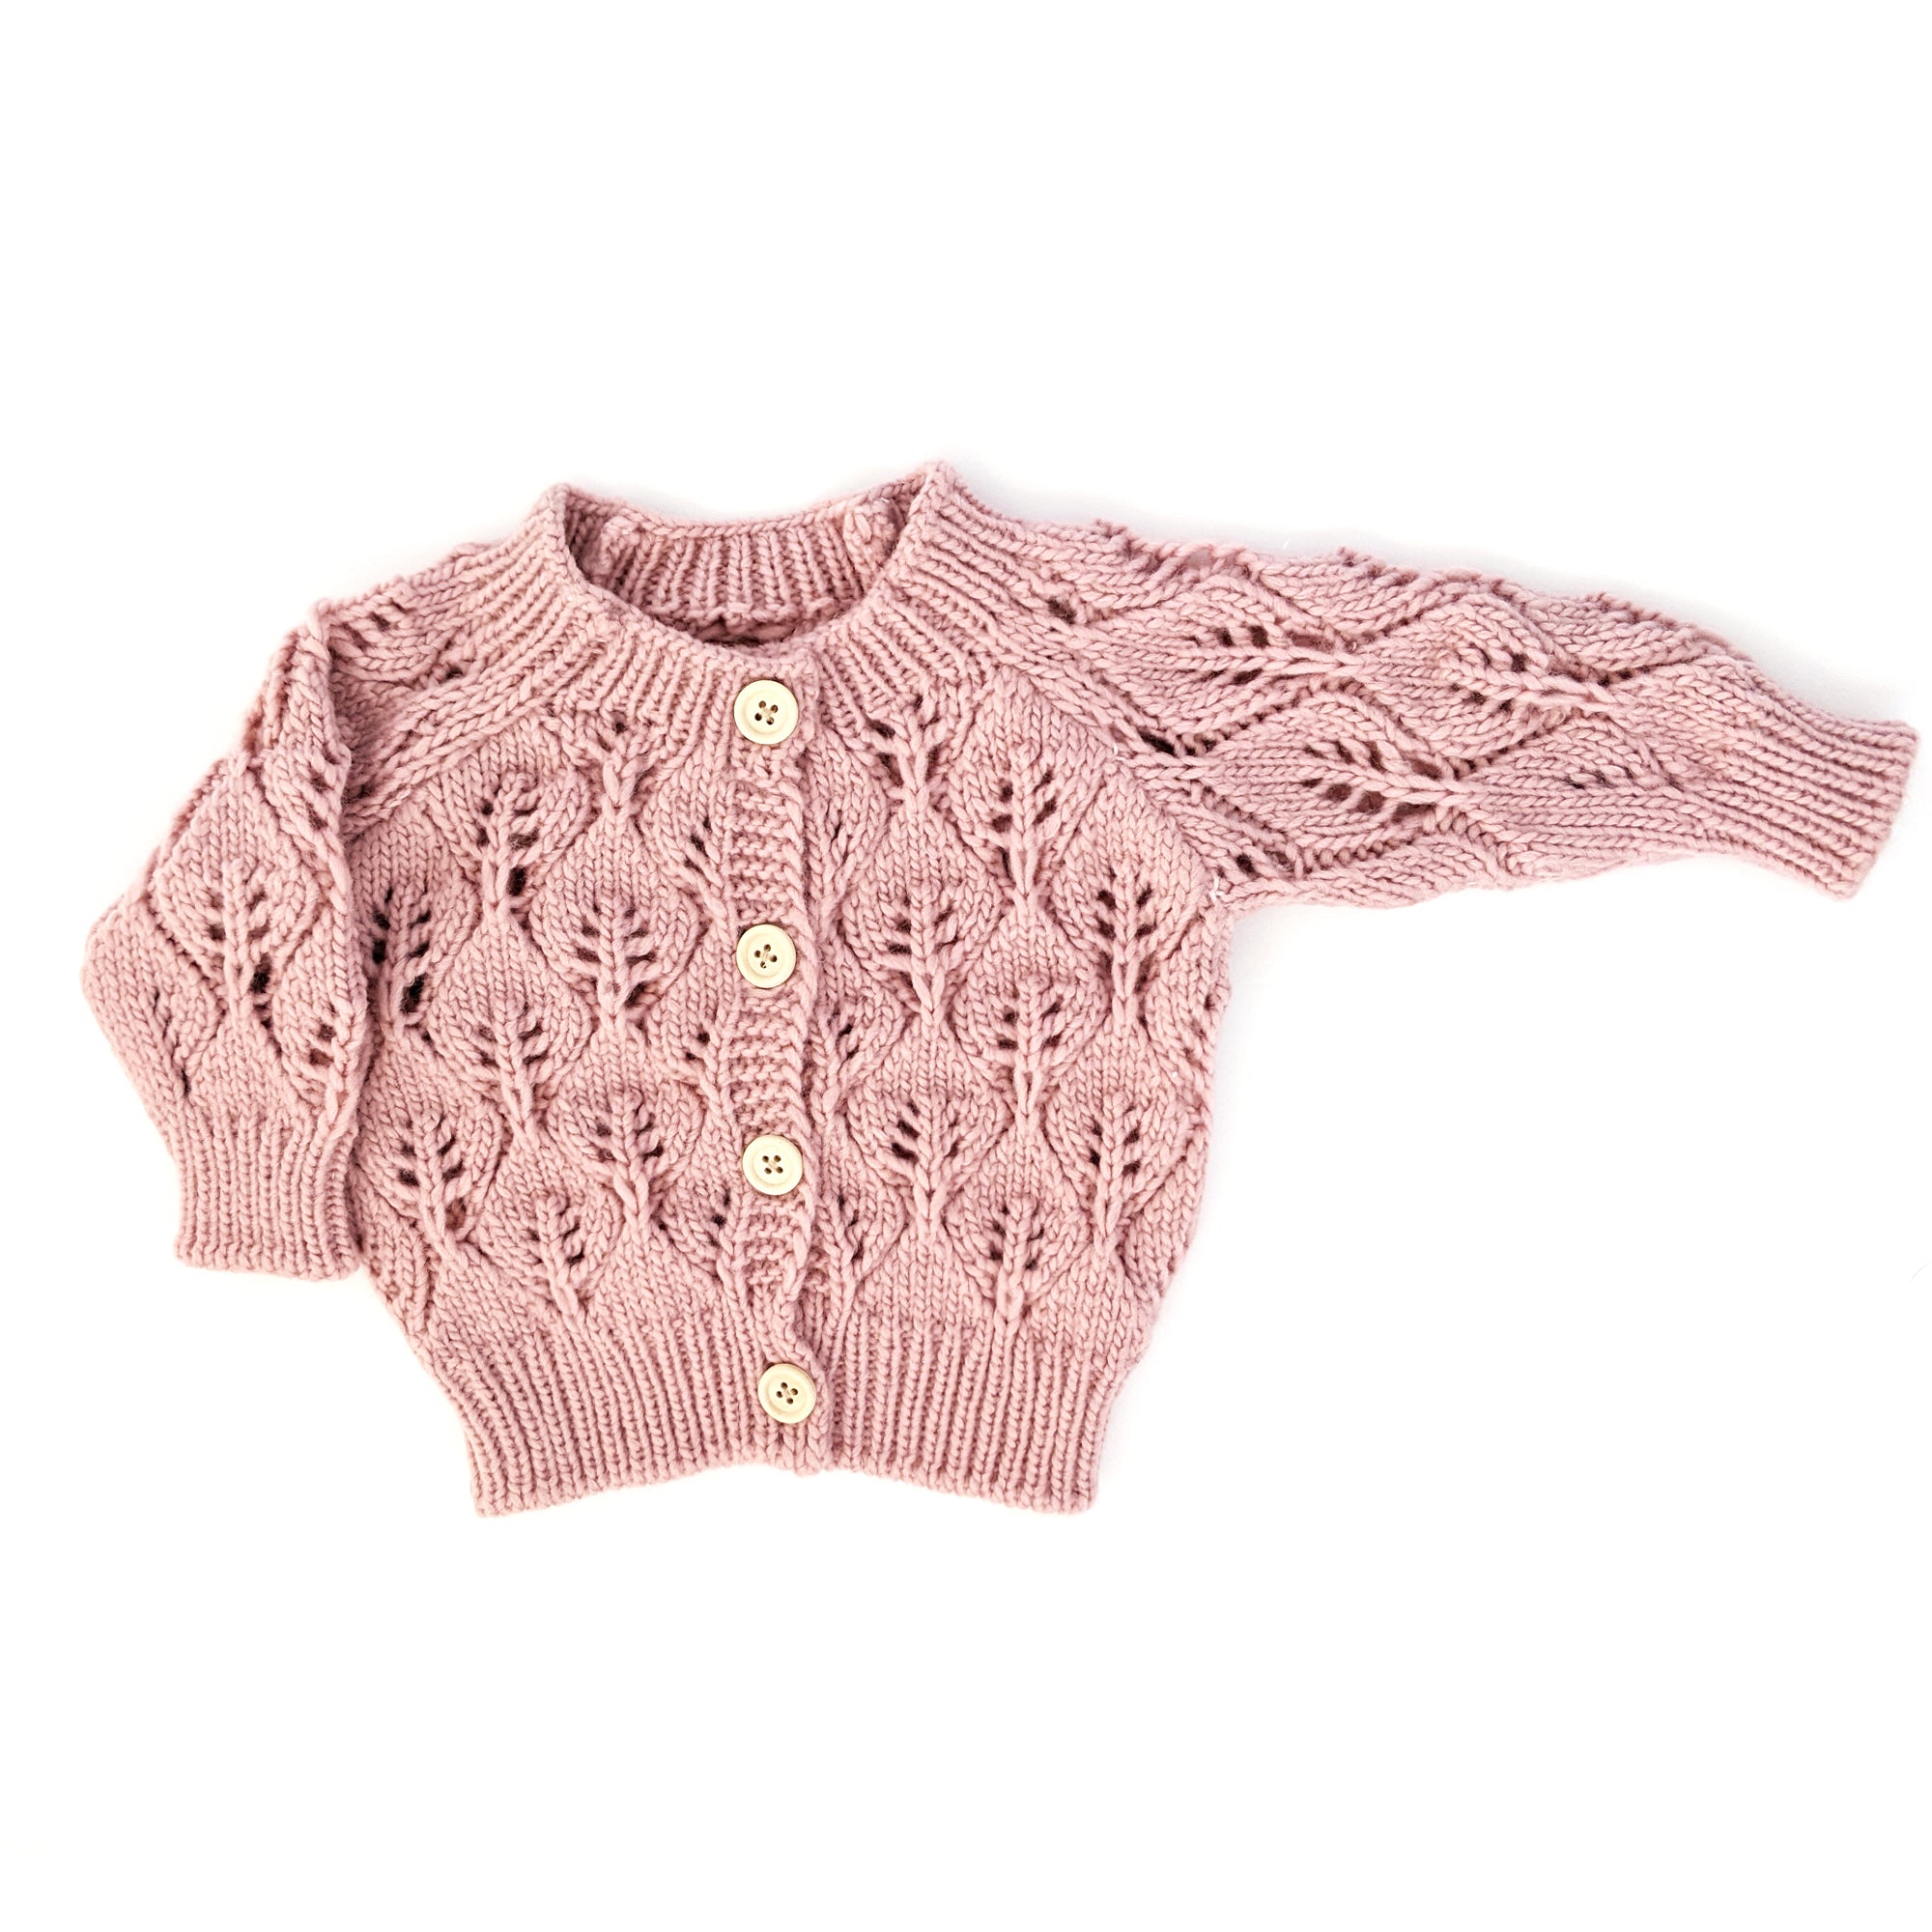 Huggalugs_Rosey Leaf Lace Sweater_Tops